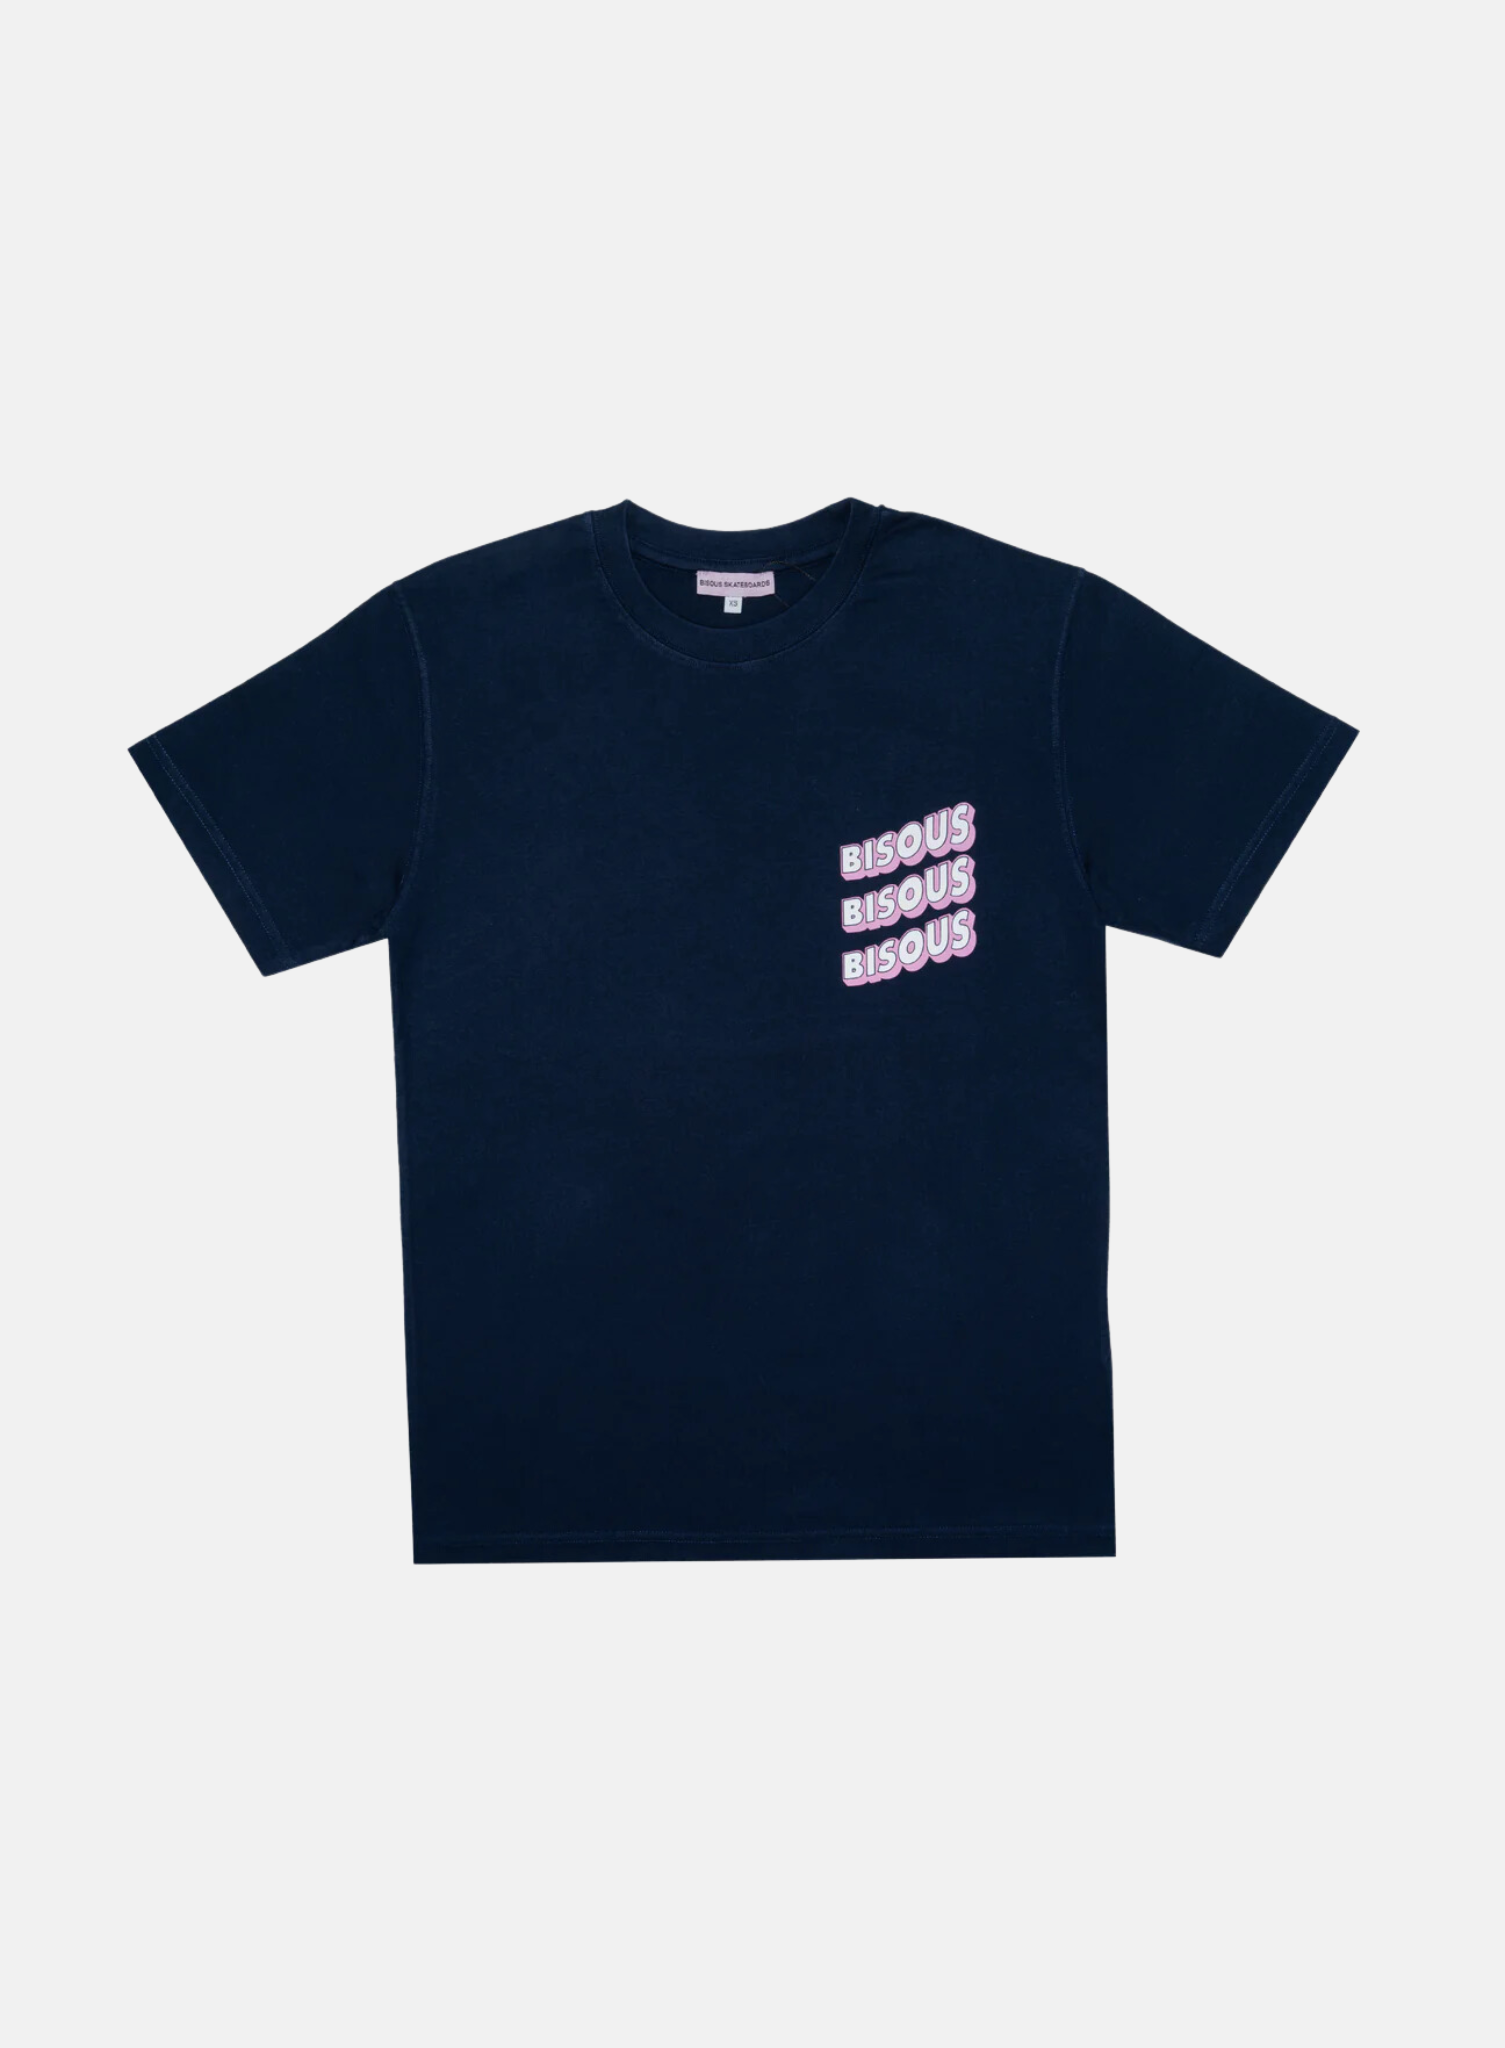 BISOUS SKATEBOARDS SS Sonics Tee Navy - Hympala Store 